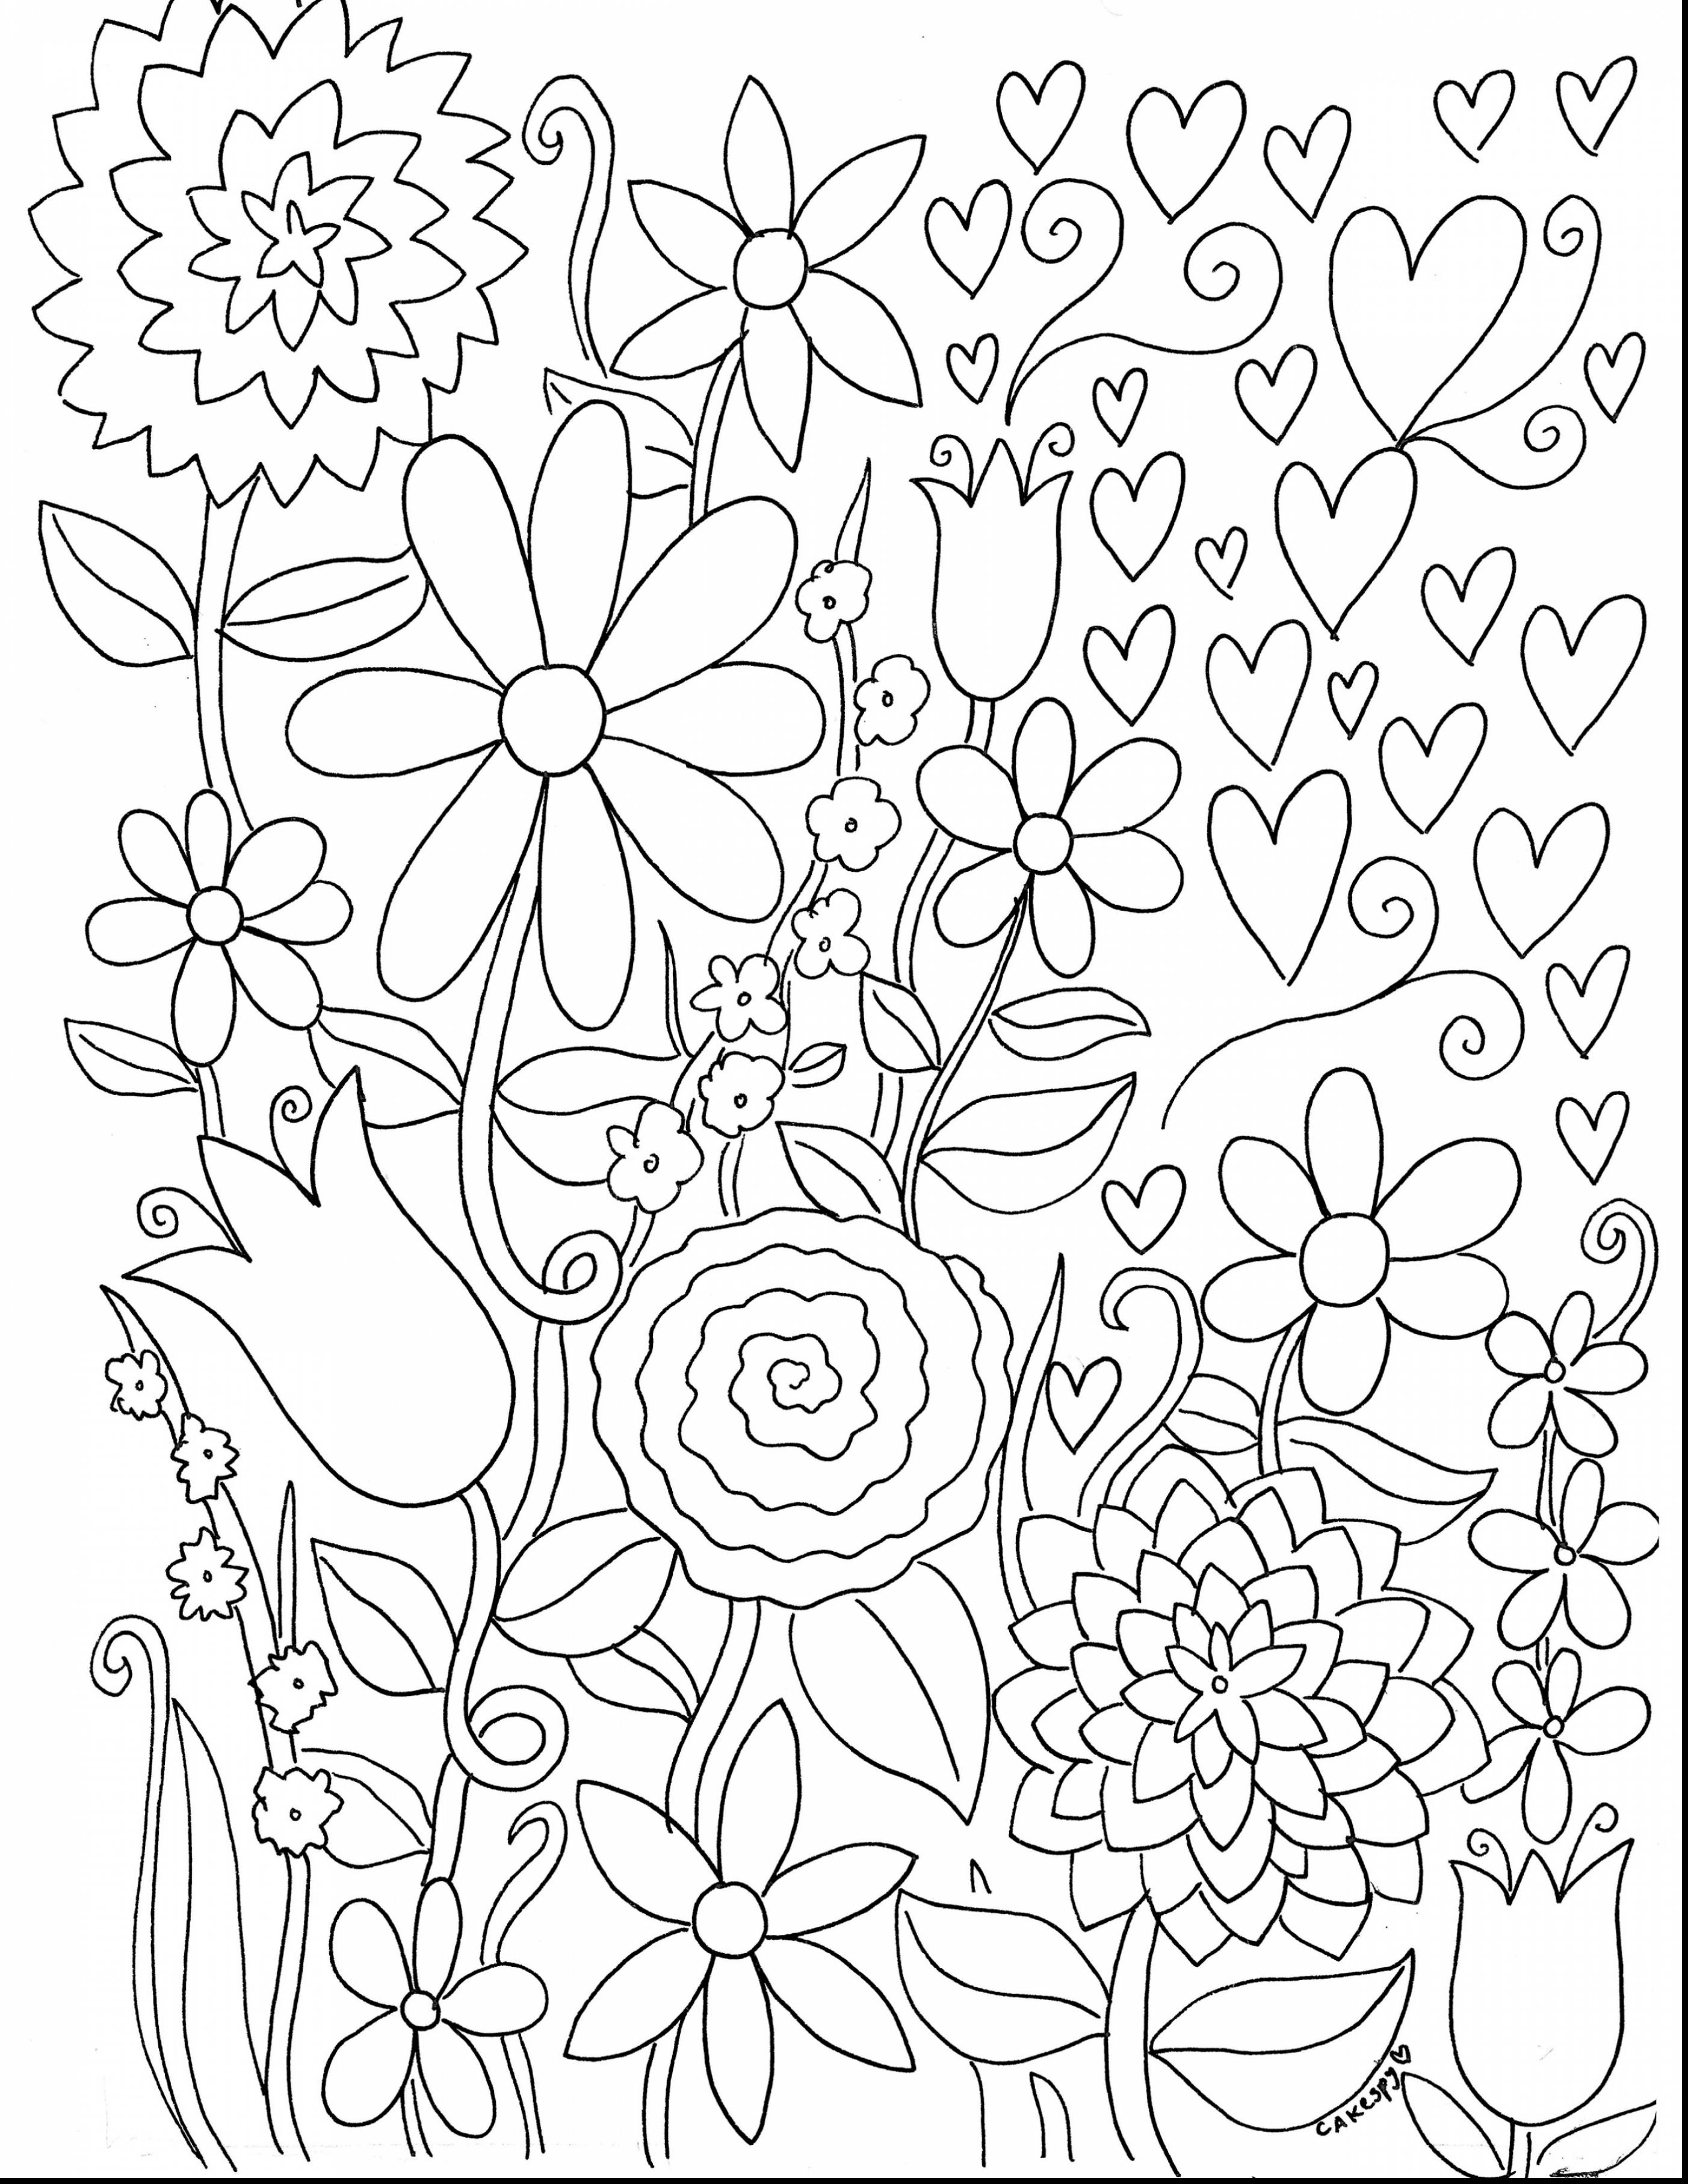 Design Your Own Coloring Pages at GetColoringscom Free